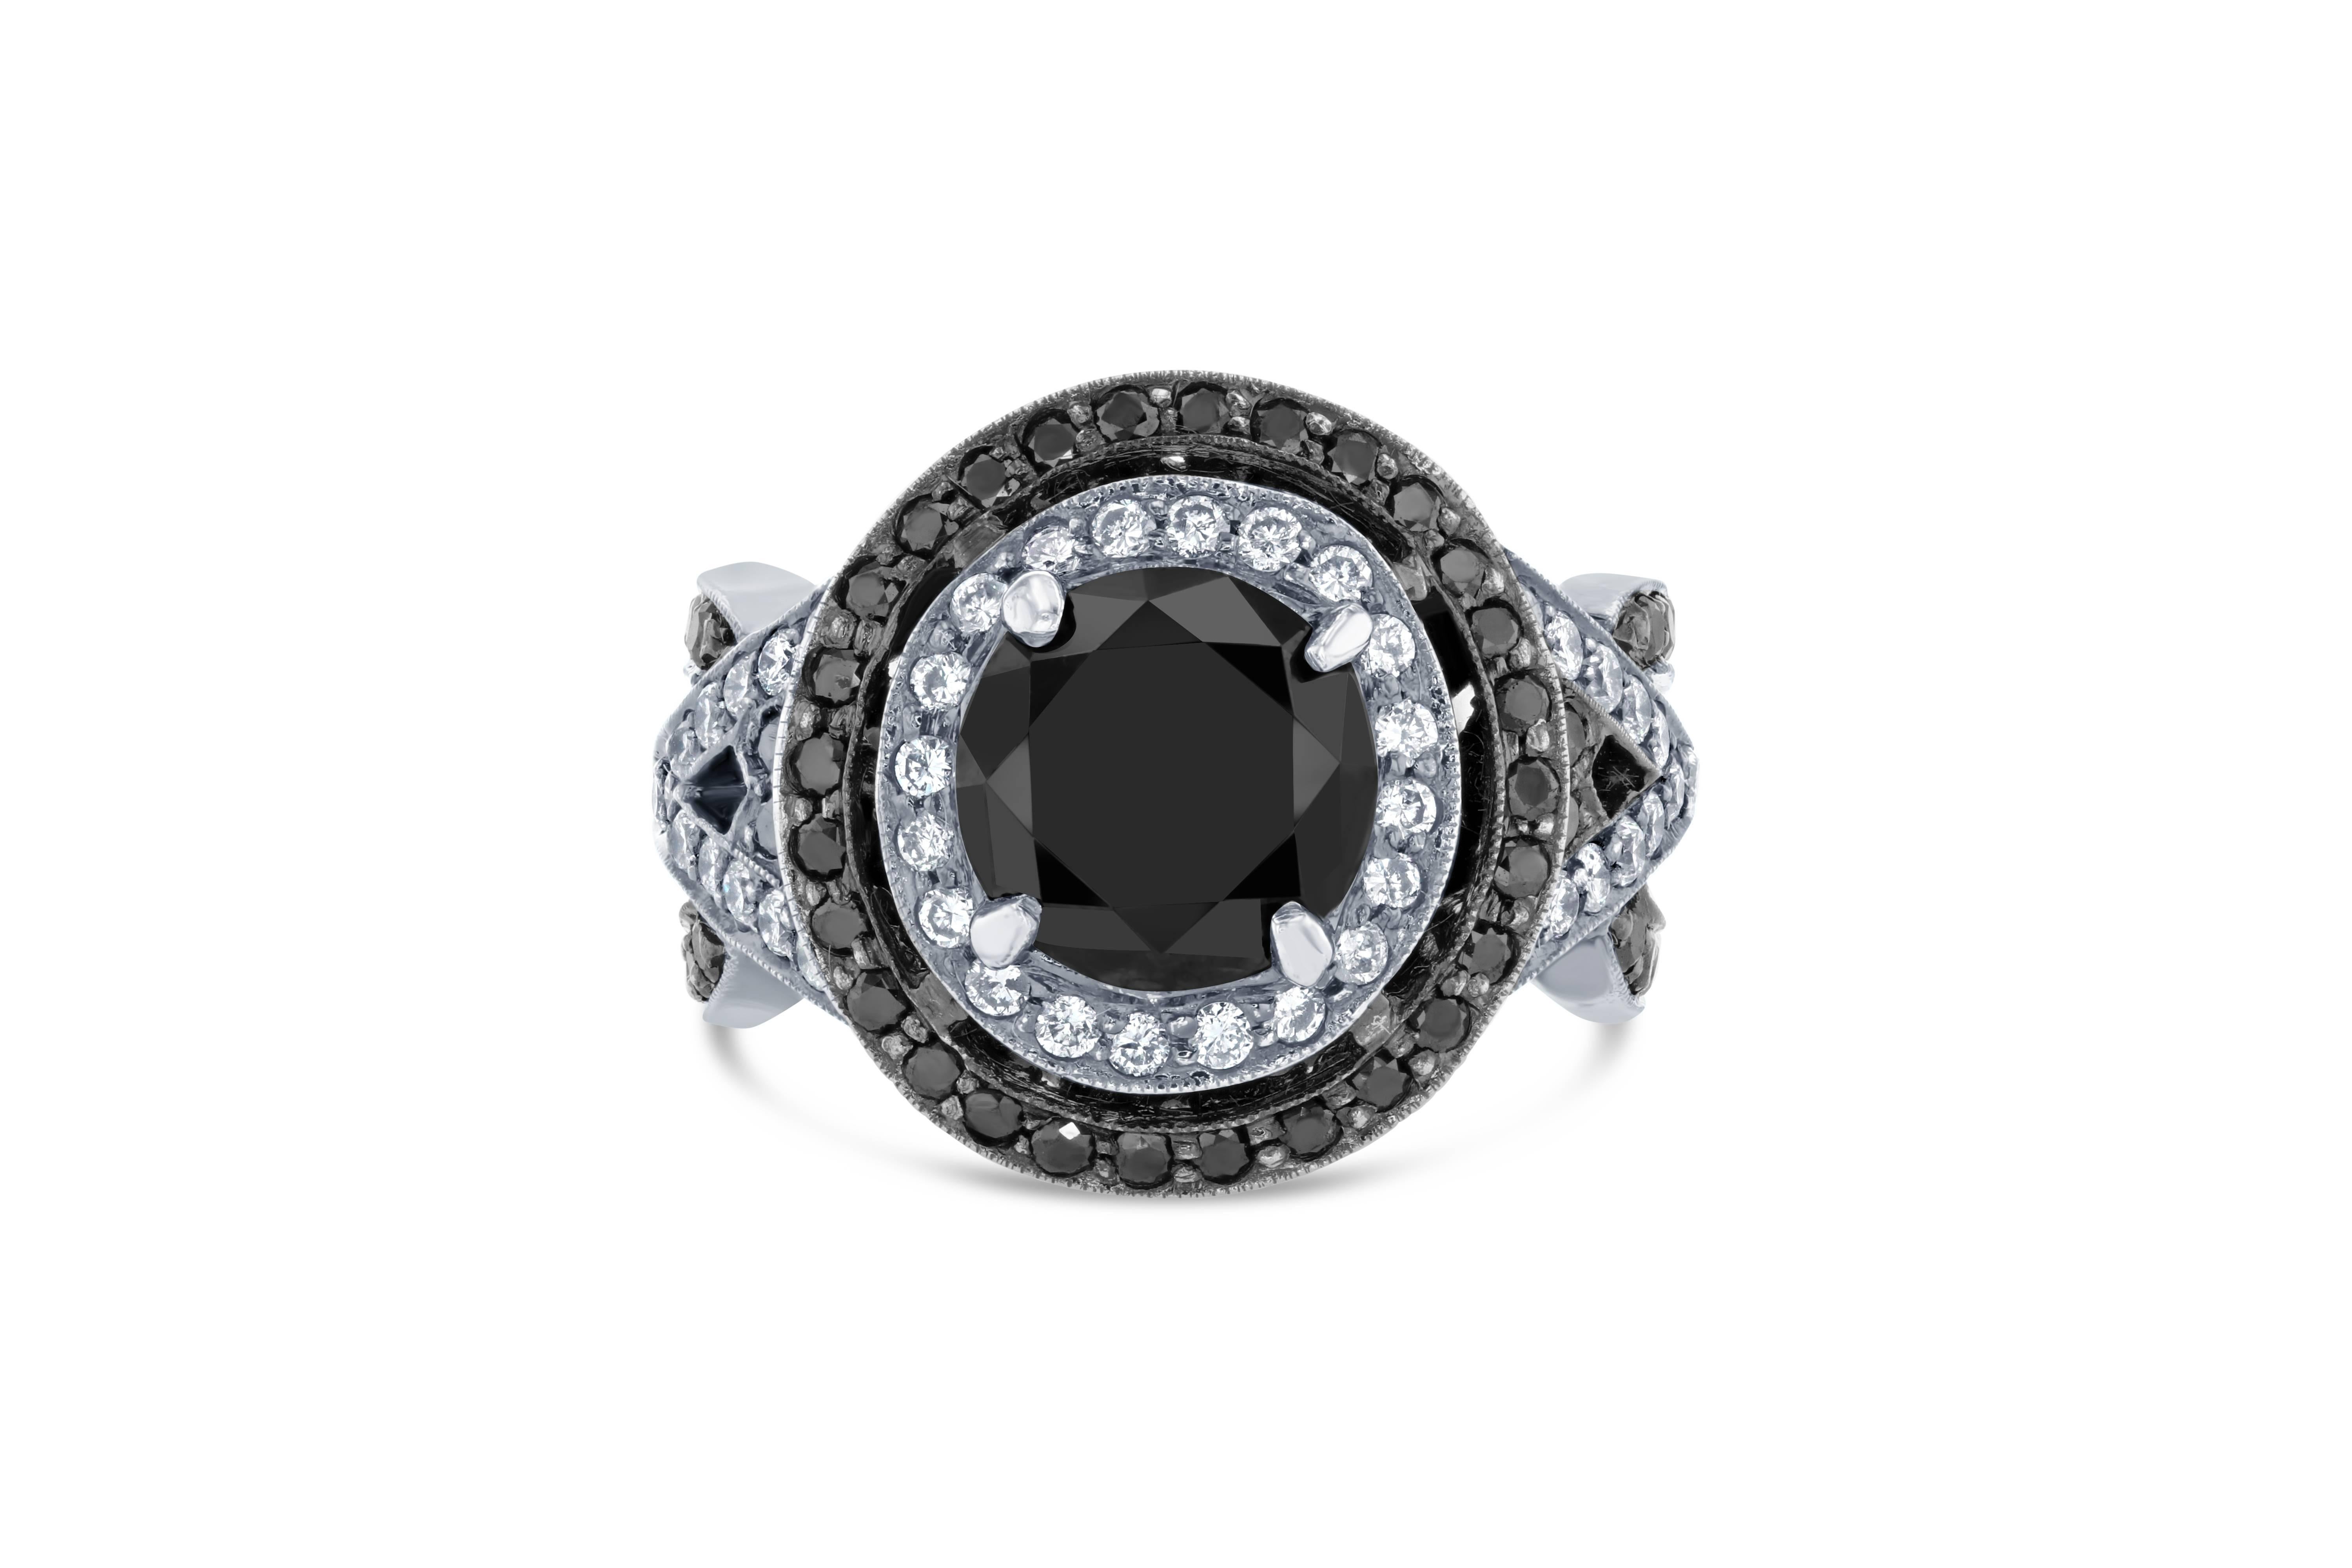 4.51 Carat Round Cut Black Diamond White Gold Bridal Ring!

Gorgeous Black Diamond ring that can transform into an Engagement ring.  There is a 3.03 carat Round Cut Black Diamond in the center on the ring which is surrounded by 44 White Round Cut